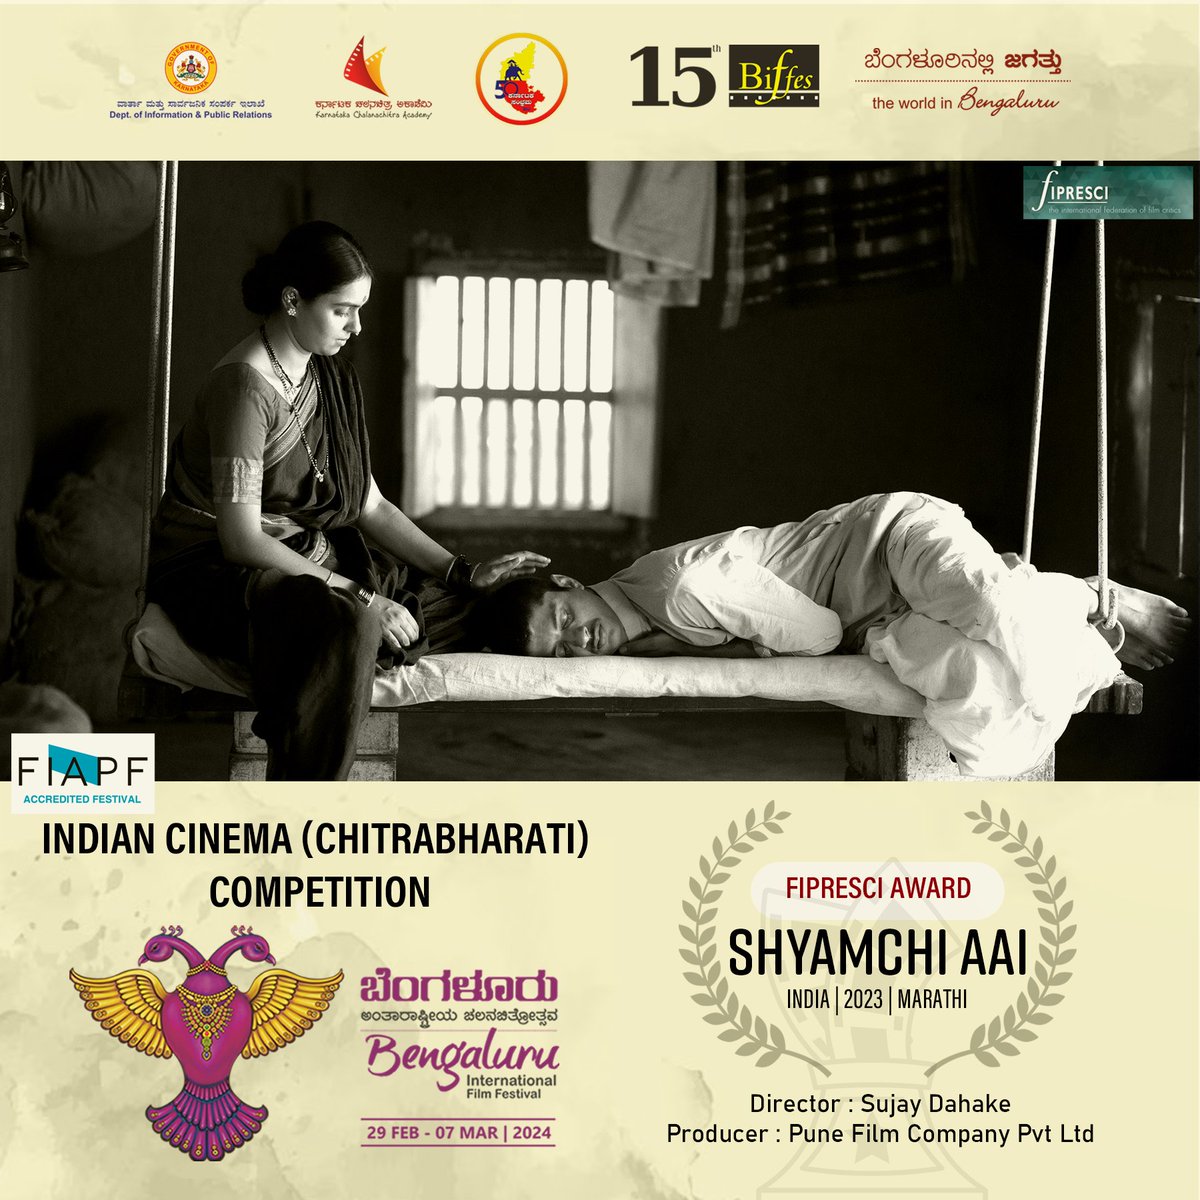 Chitrabharati (Indian) Cinema Competition Sections FIPRESCI Special Jury Mention Cinema. For more details please visit - biffes.org #BIFFes #BIFFes2024 #WorldInBengaluru #FIAPF #FilmFestival #Filmfestival #Chitrabharathispecialjurymentioncinema #Indiancinema